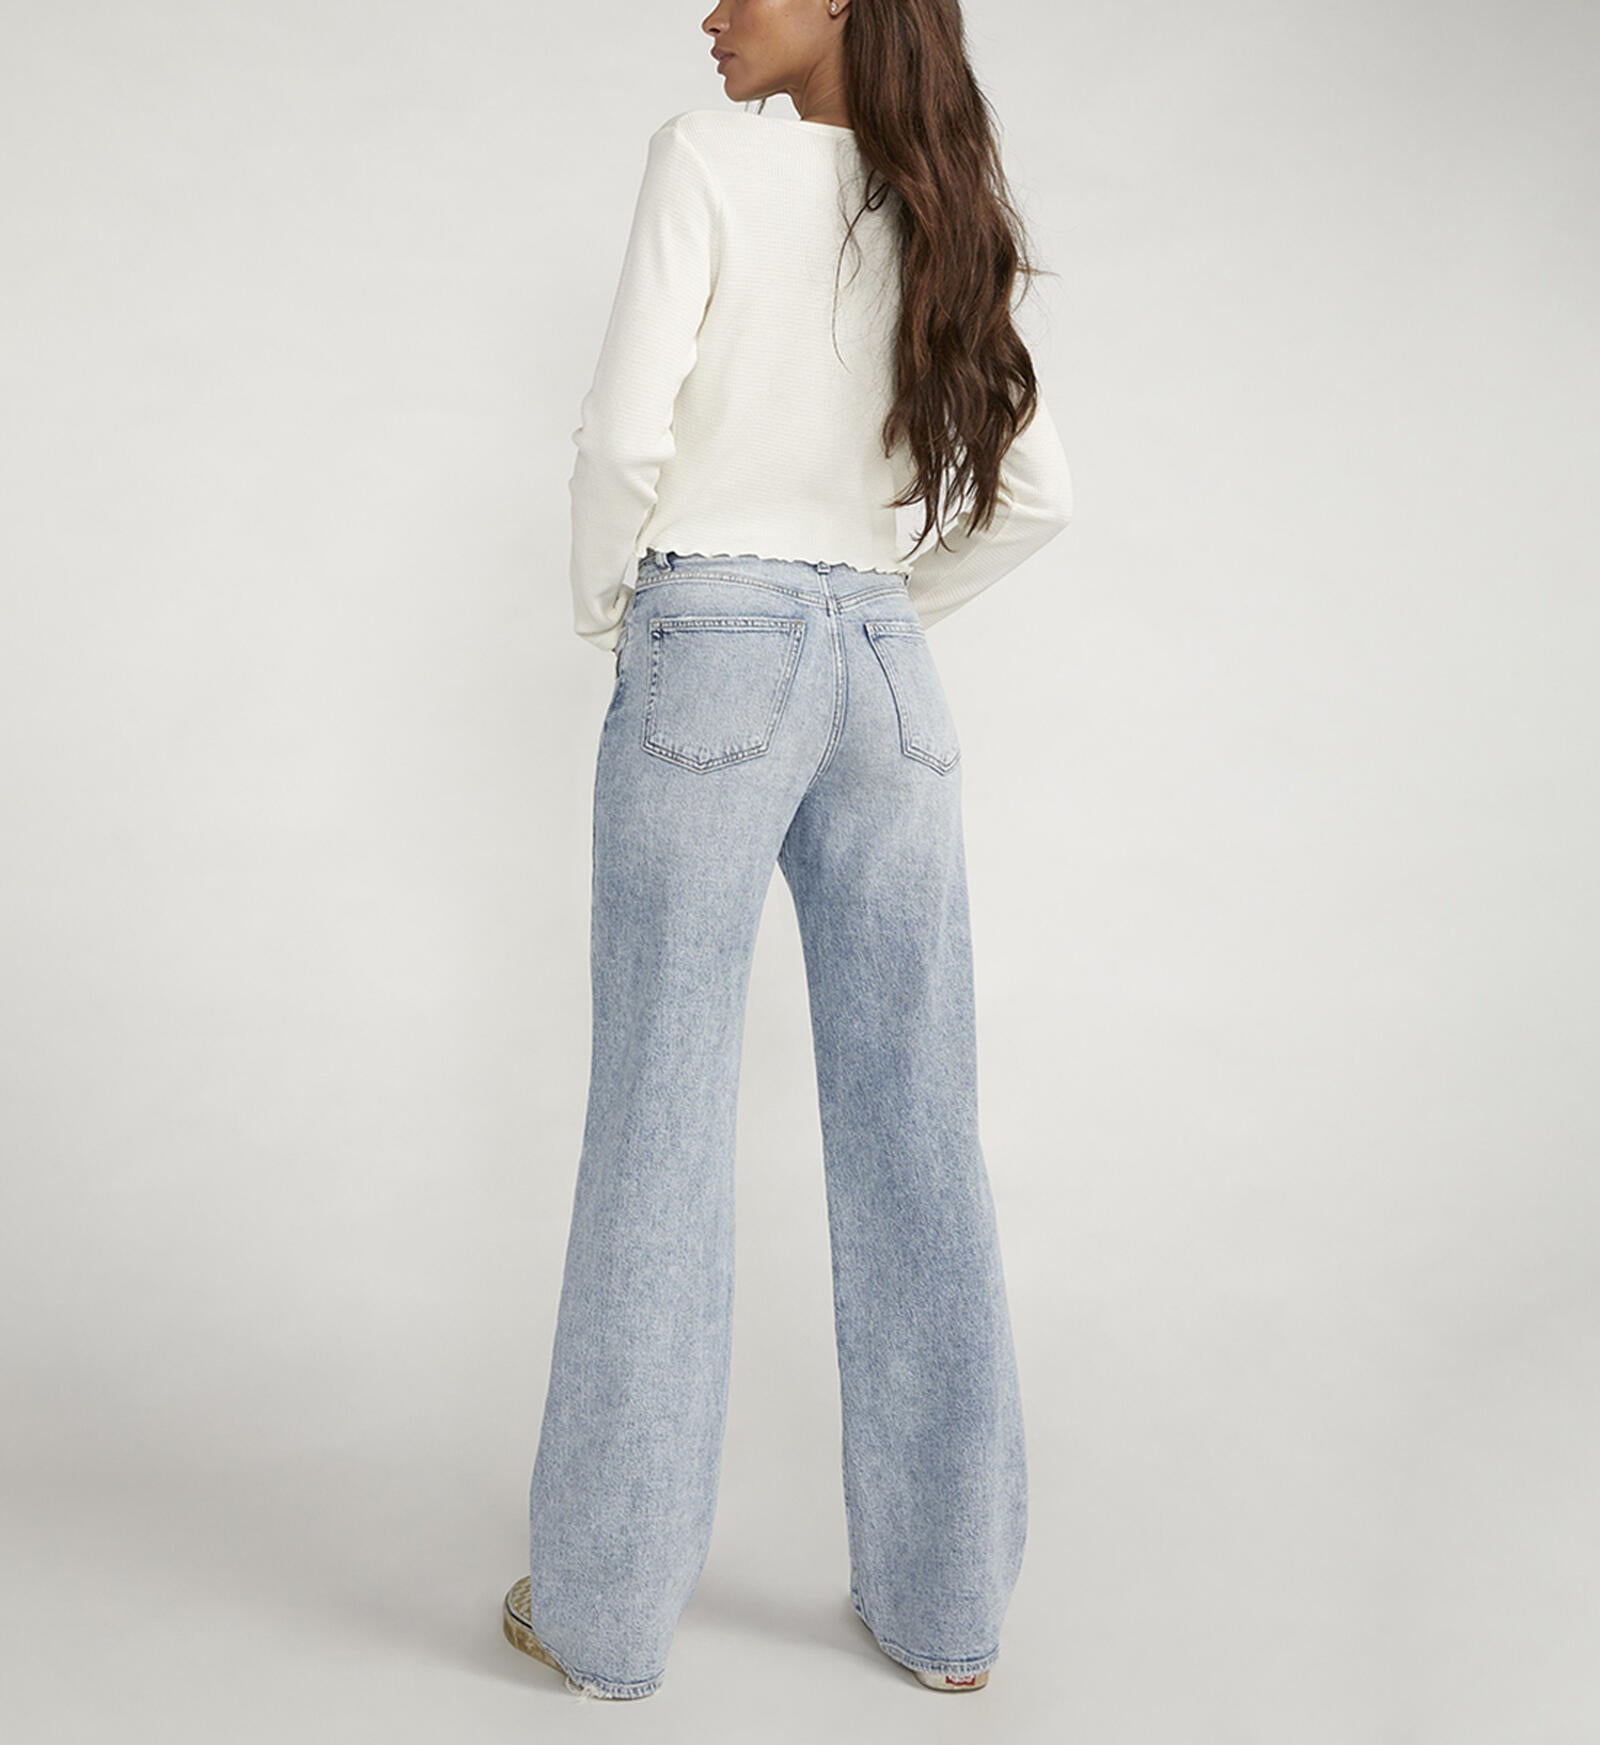 SILVER JEANS Highly Desirable Trouser